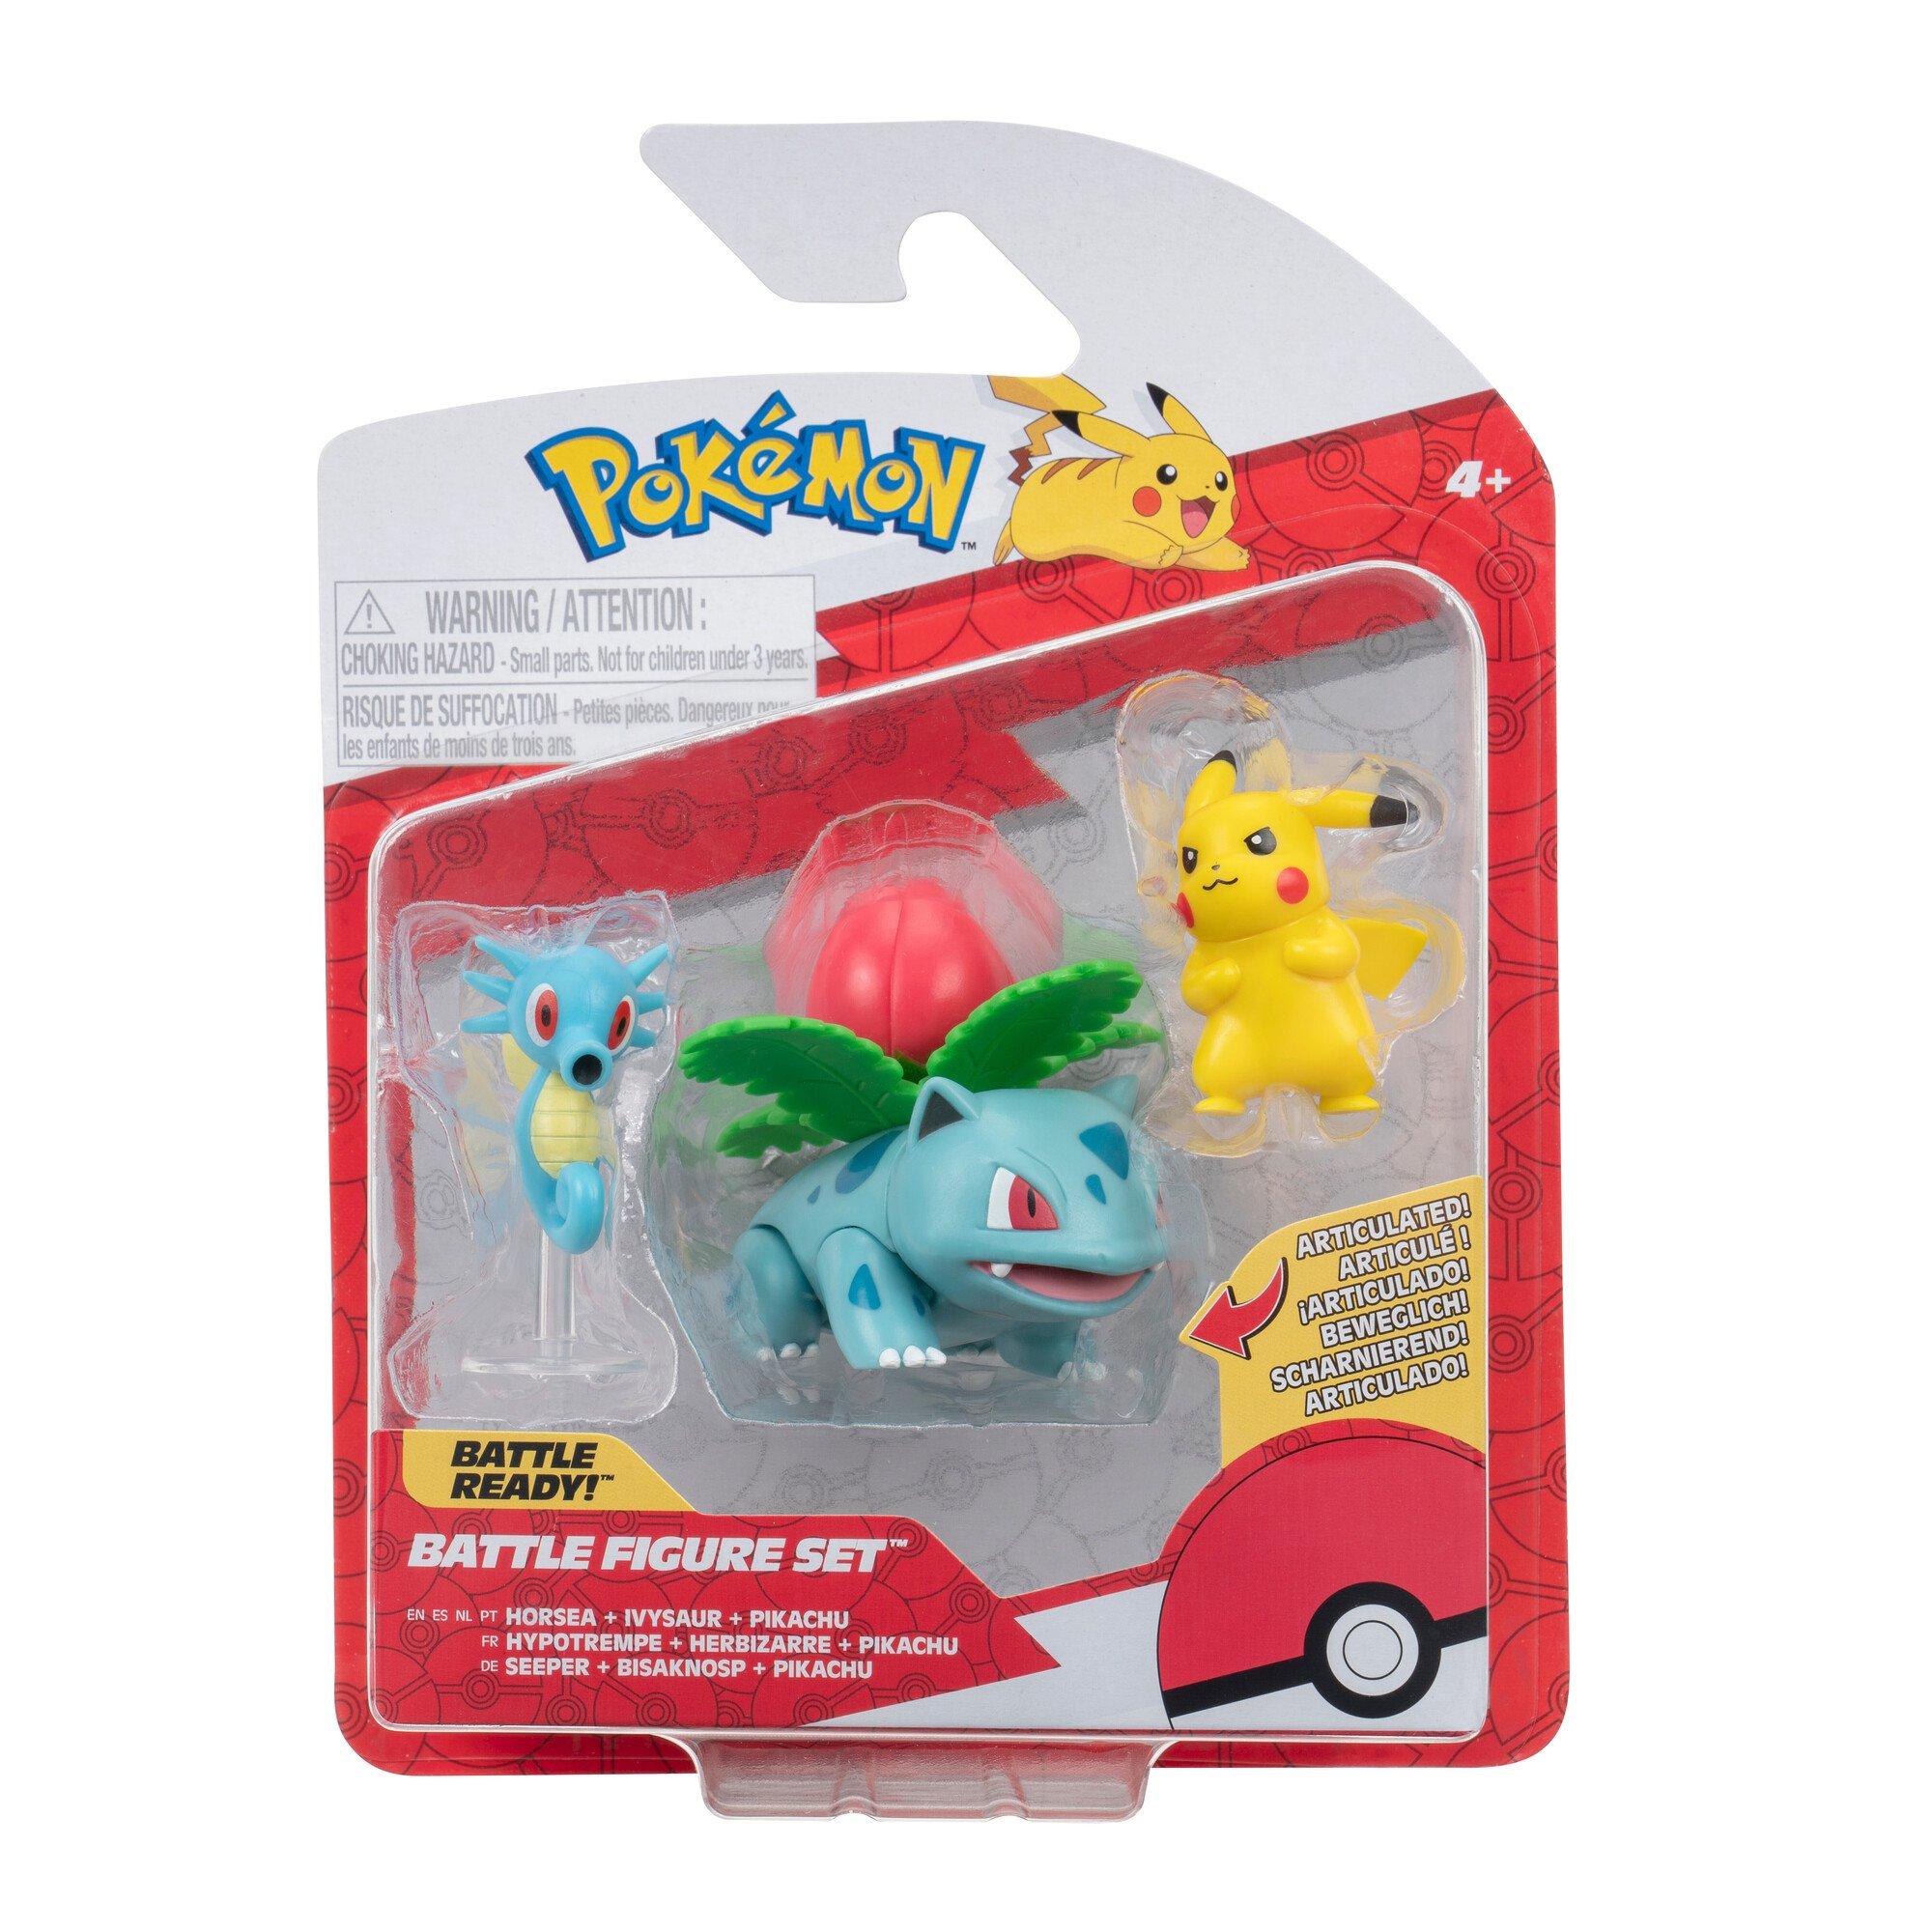  Pokemon Pencil Top Viewers (4 count) : Toys & Games